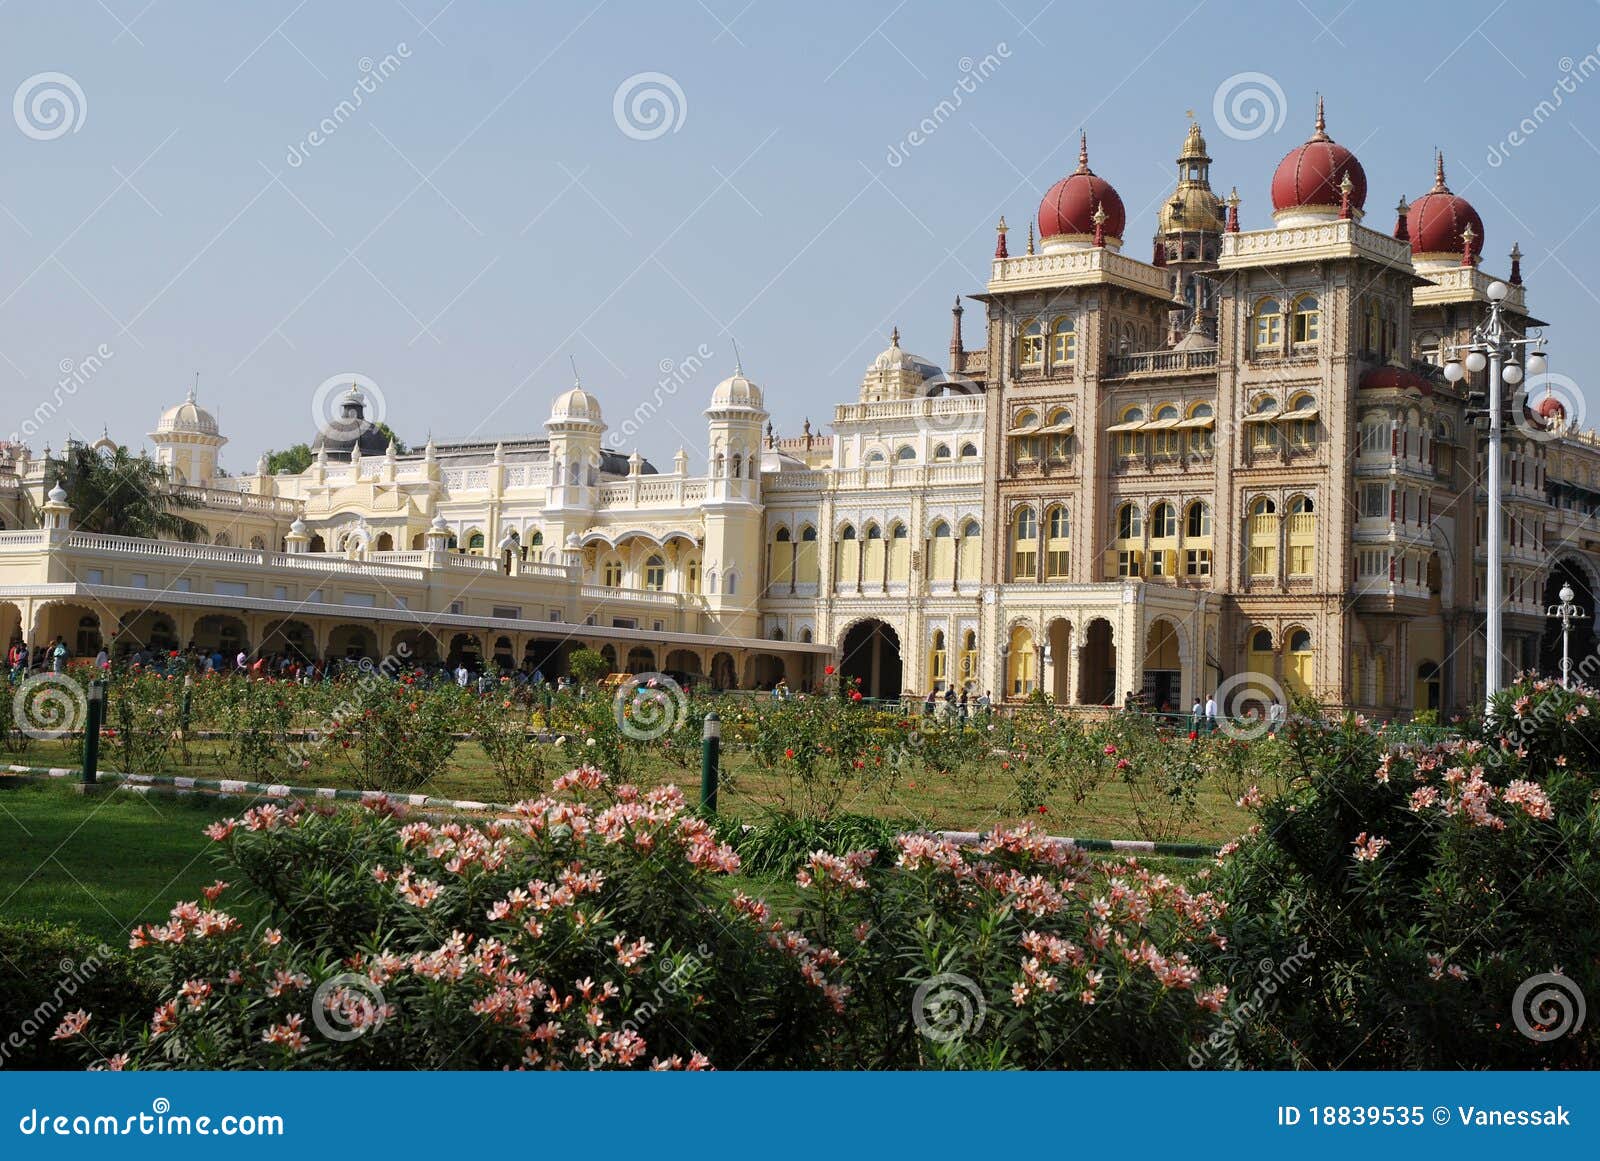 the garden of mysore palace in india